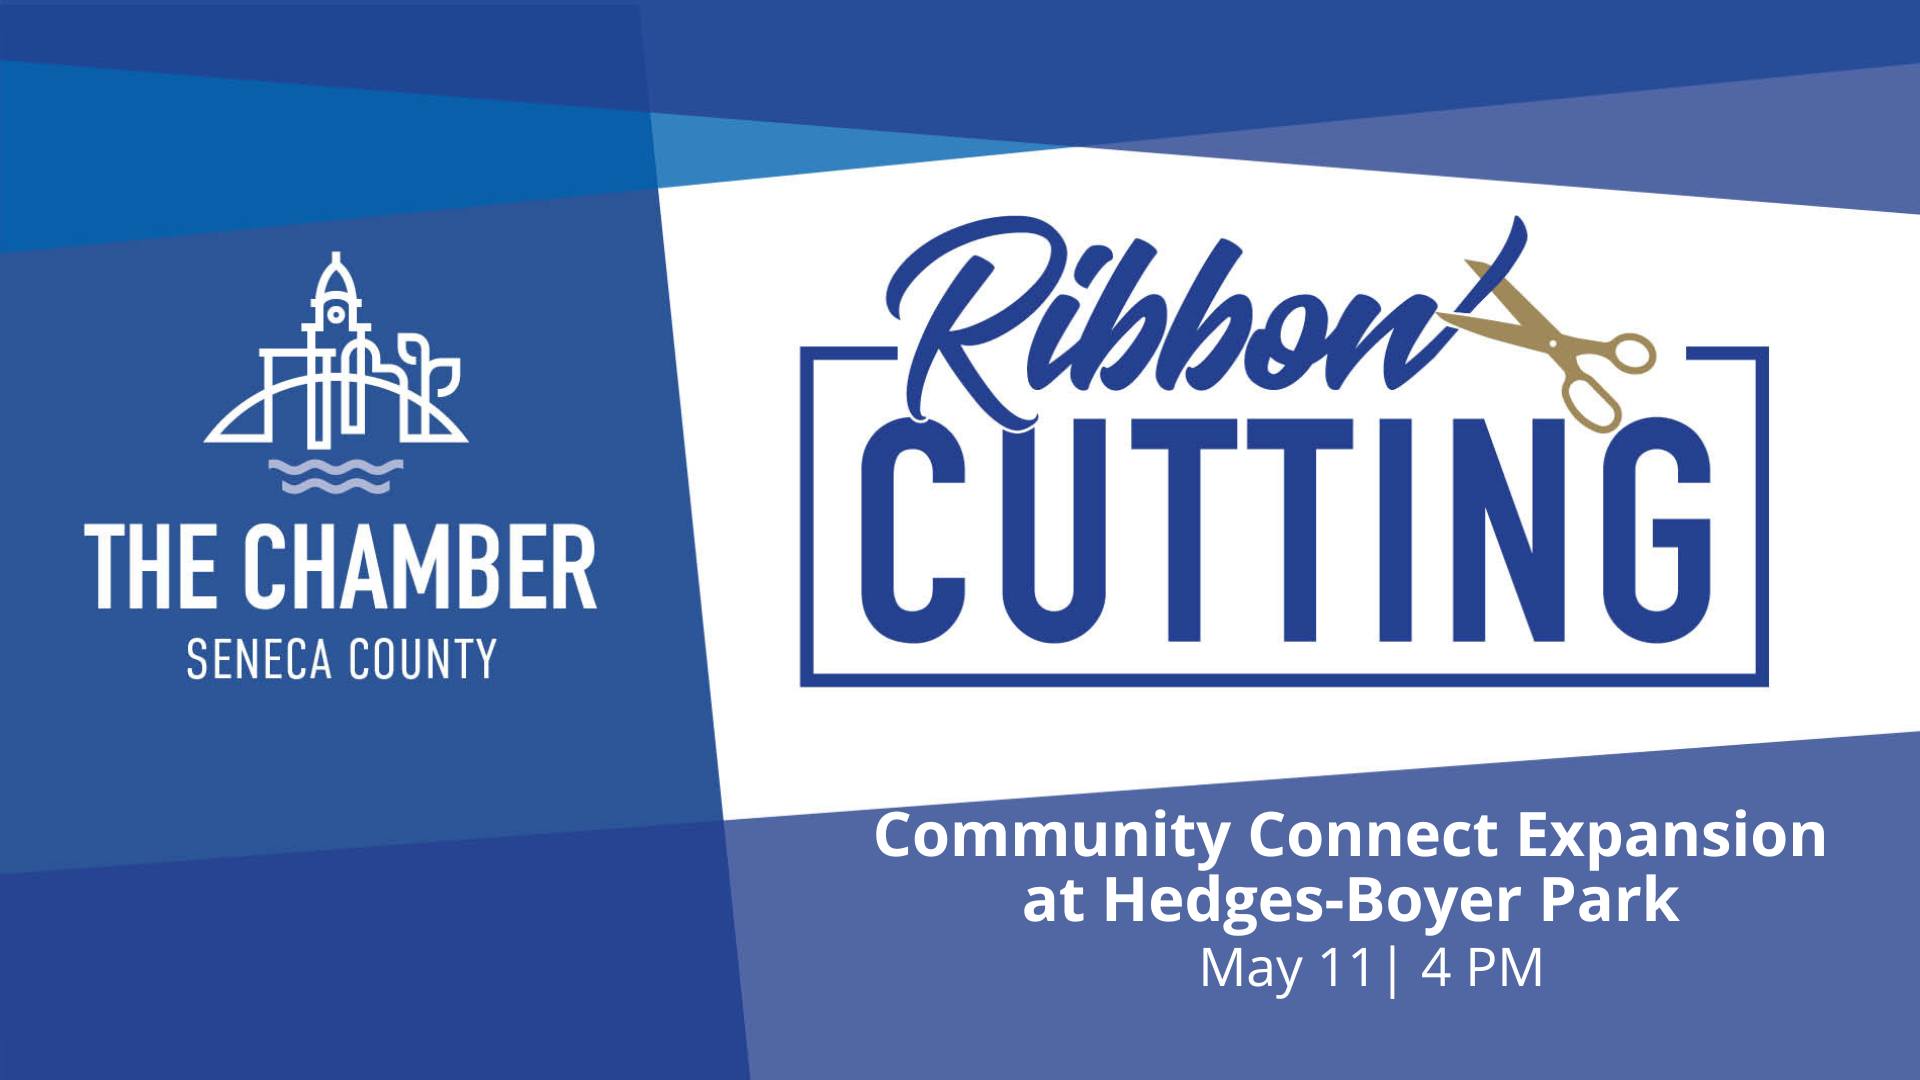 Seneca Regional Chamber Ribbon Cutting | Community Connect Expansion at Hedges-Boyer Park